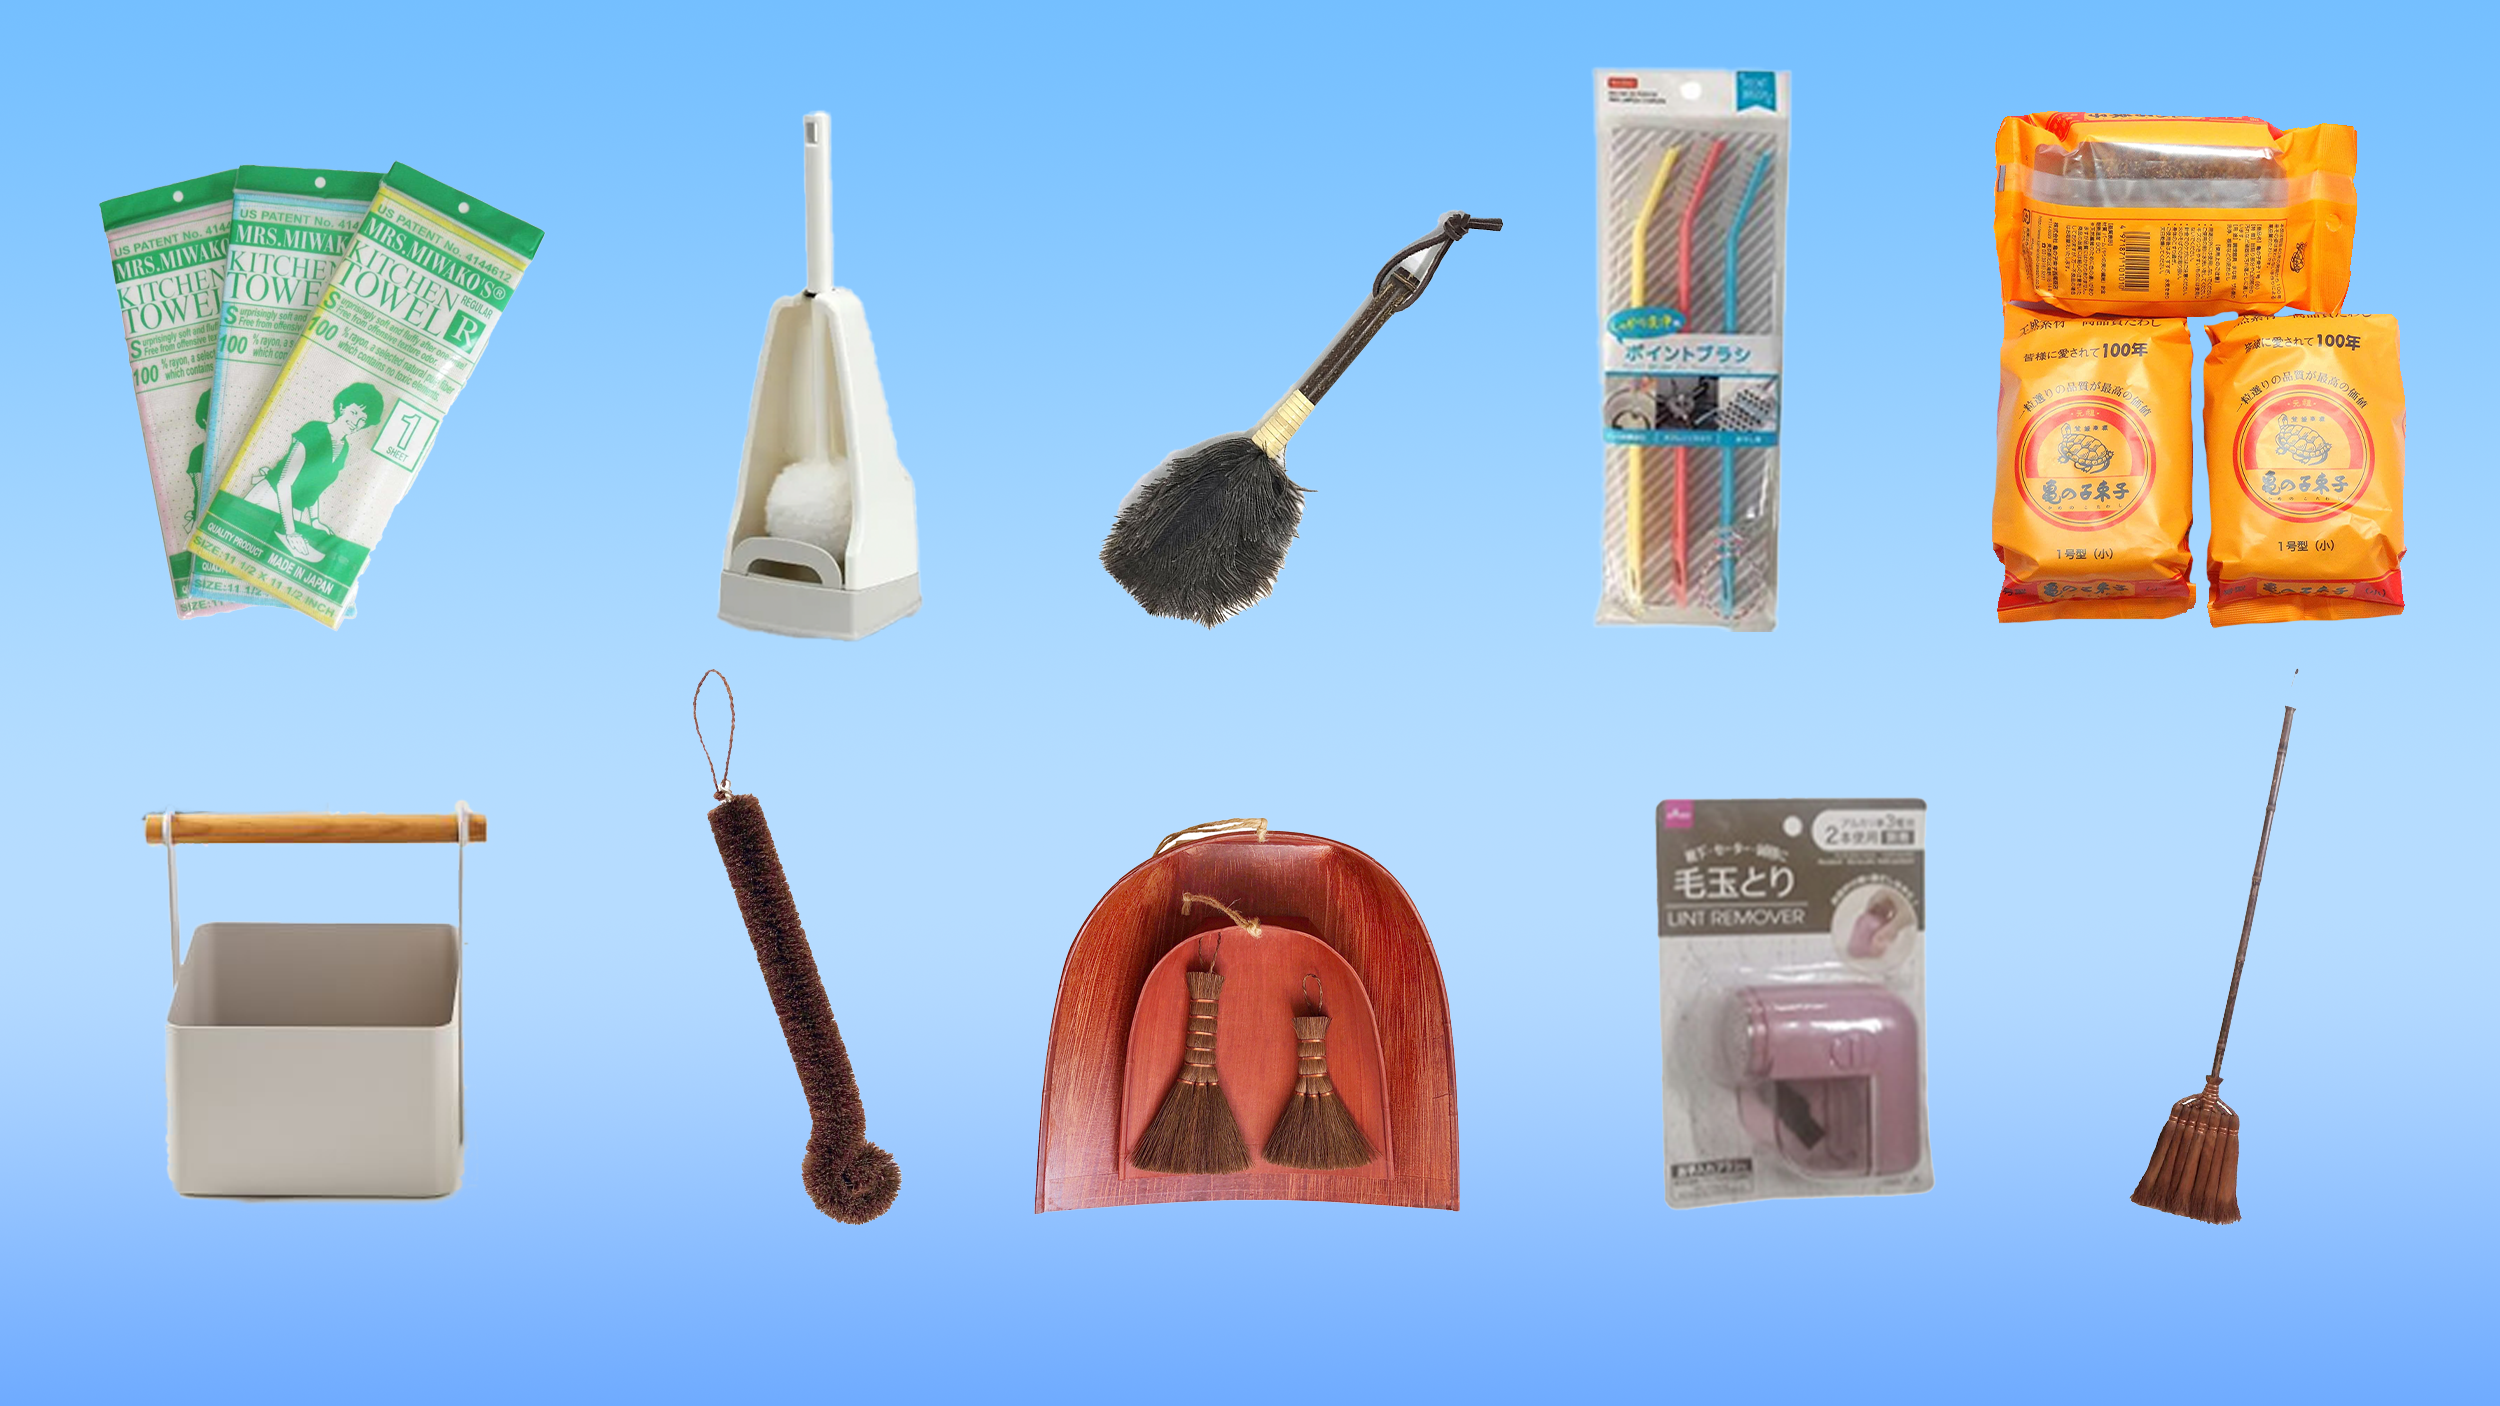 Japan Grout Brush Tile Grout Cleaner Cleaning Tool For Bathroom